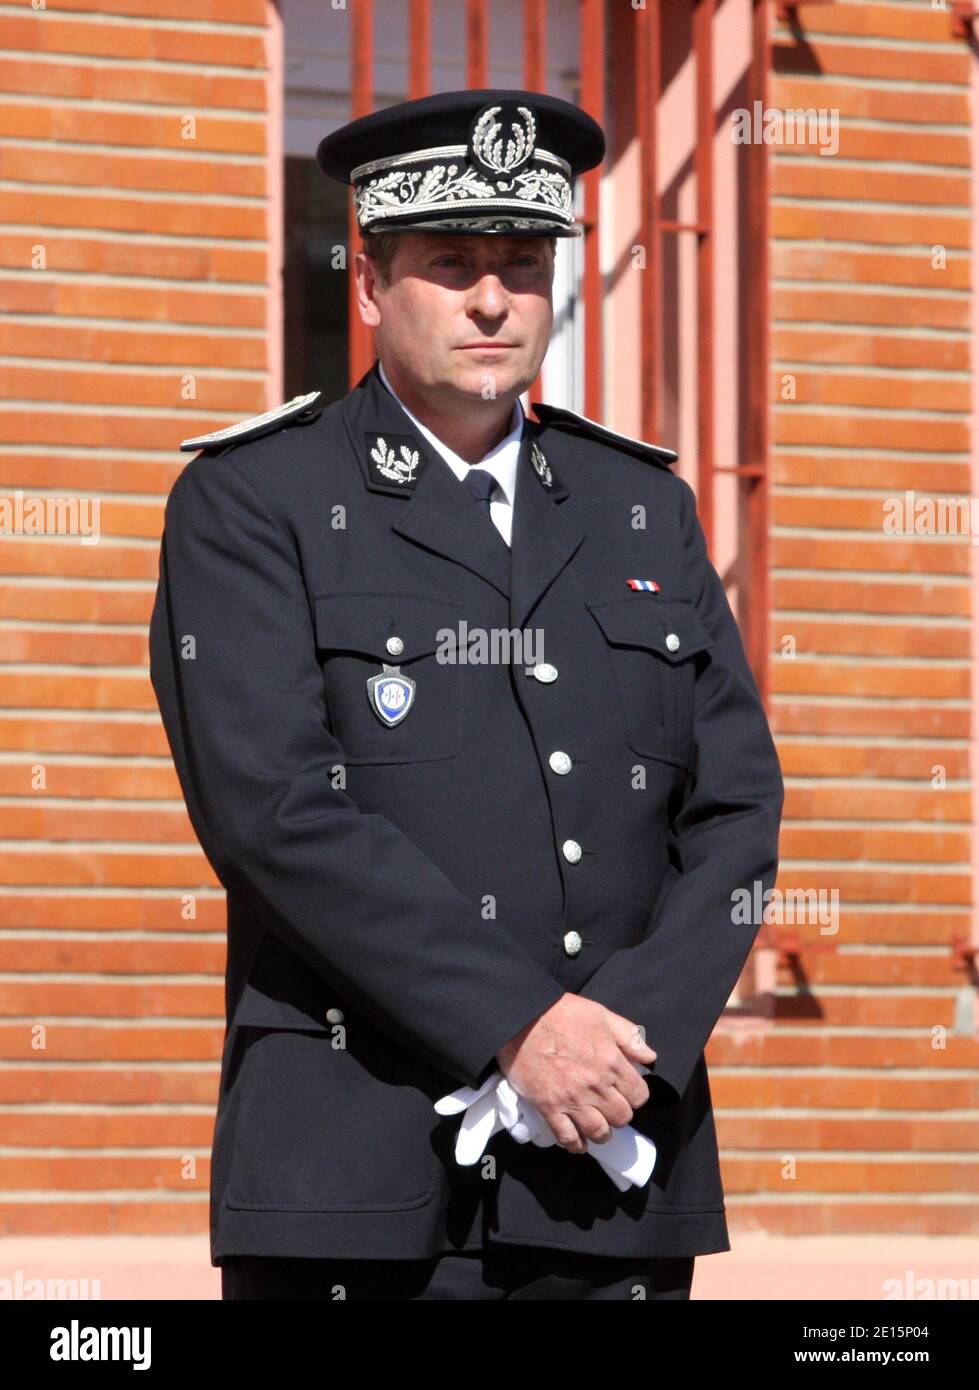 The zonal director of PJ's Roland Gauze during the Ceremony of Christian Lajarrige's installation, as new Director of the Police on the Borders of the Pyrenees-Orientales. In the presence of : the prefect's Jean-Francois Delage, the Departmental Director of the Law and order Jean-Francois Scoffoni, of Major of Grouping of Gendarmerie des PO Philippe Guichard, the Director of Office of the Prefect Dominique Camilleri, the Director Inter-regional of the PJ Roland Gauze and the Regional Director of Customs Jean-Michel Pillon. A spanish delegation of authority are also present the Consul of Spain Stock Photo